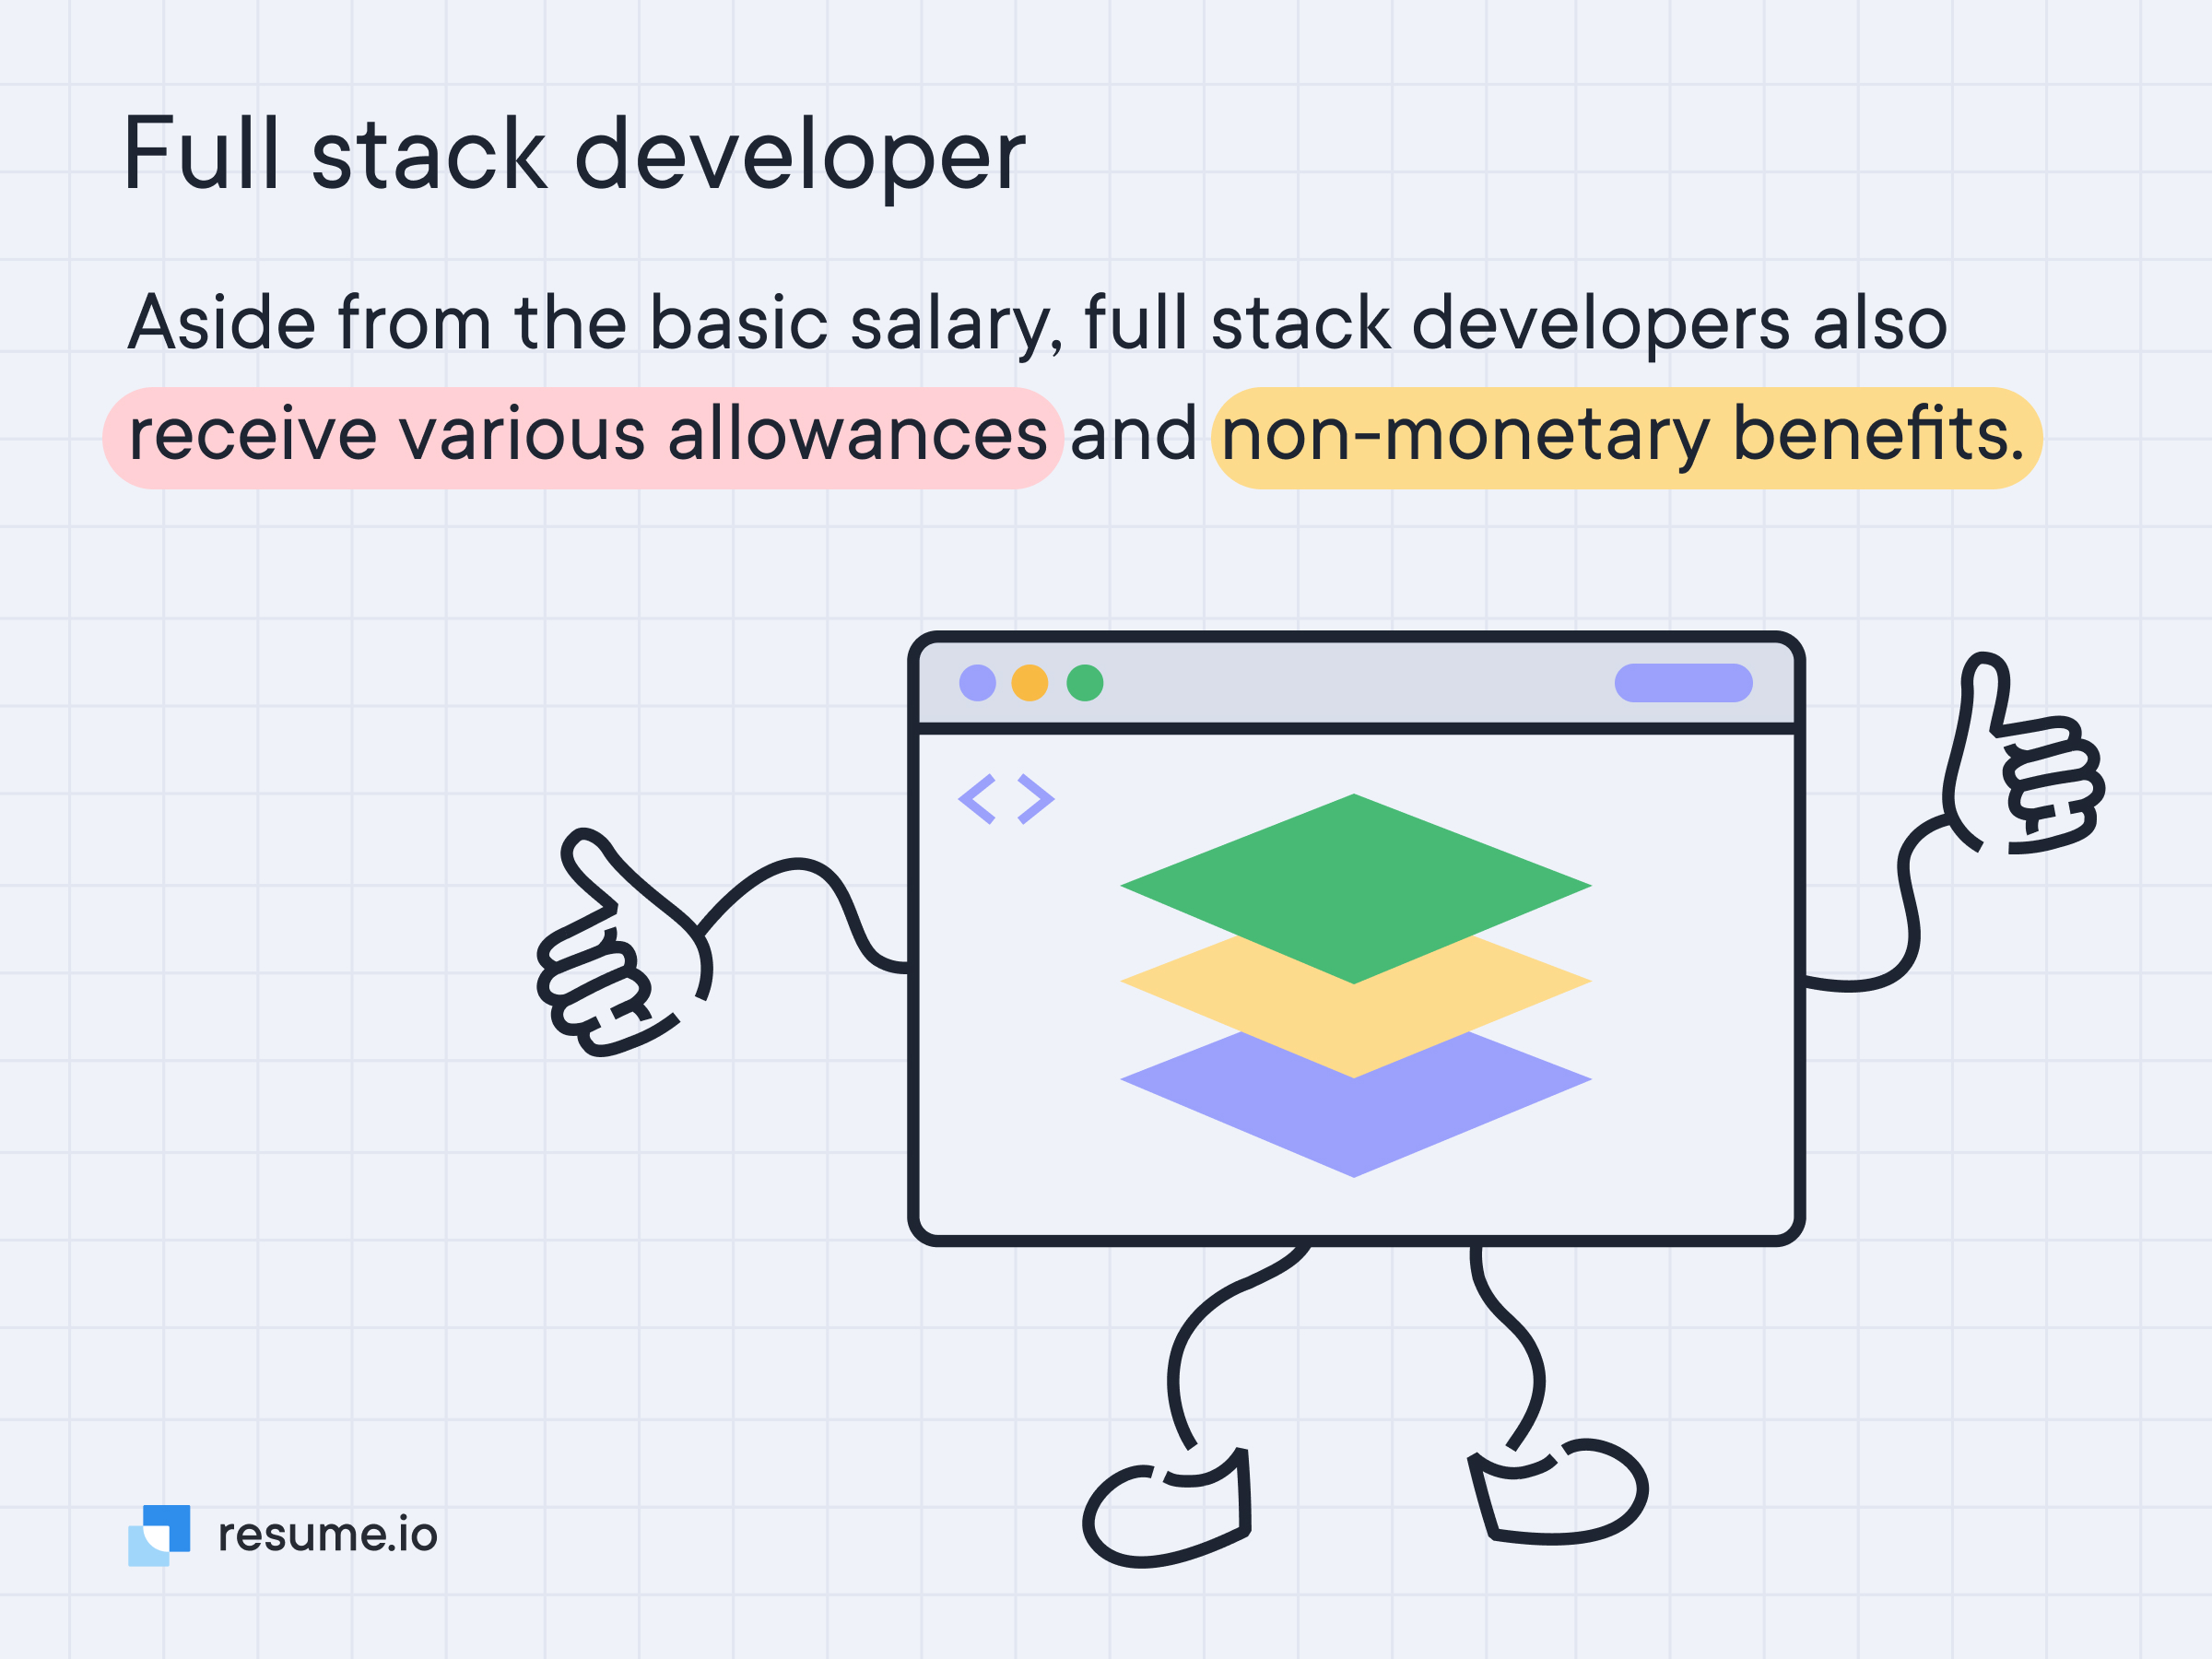 Full stack developers receive various allowances and non-monetary benefits